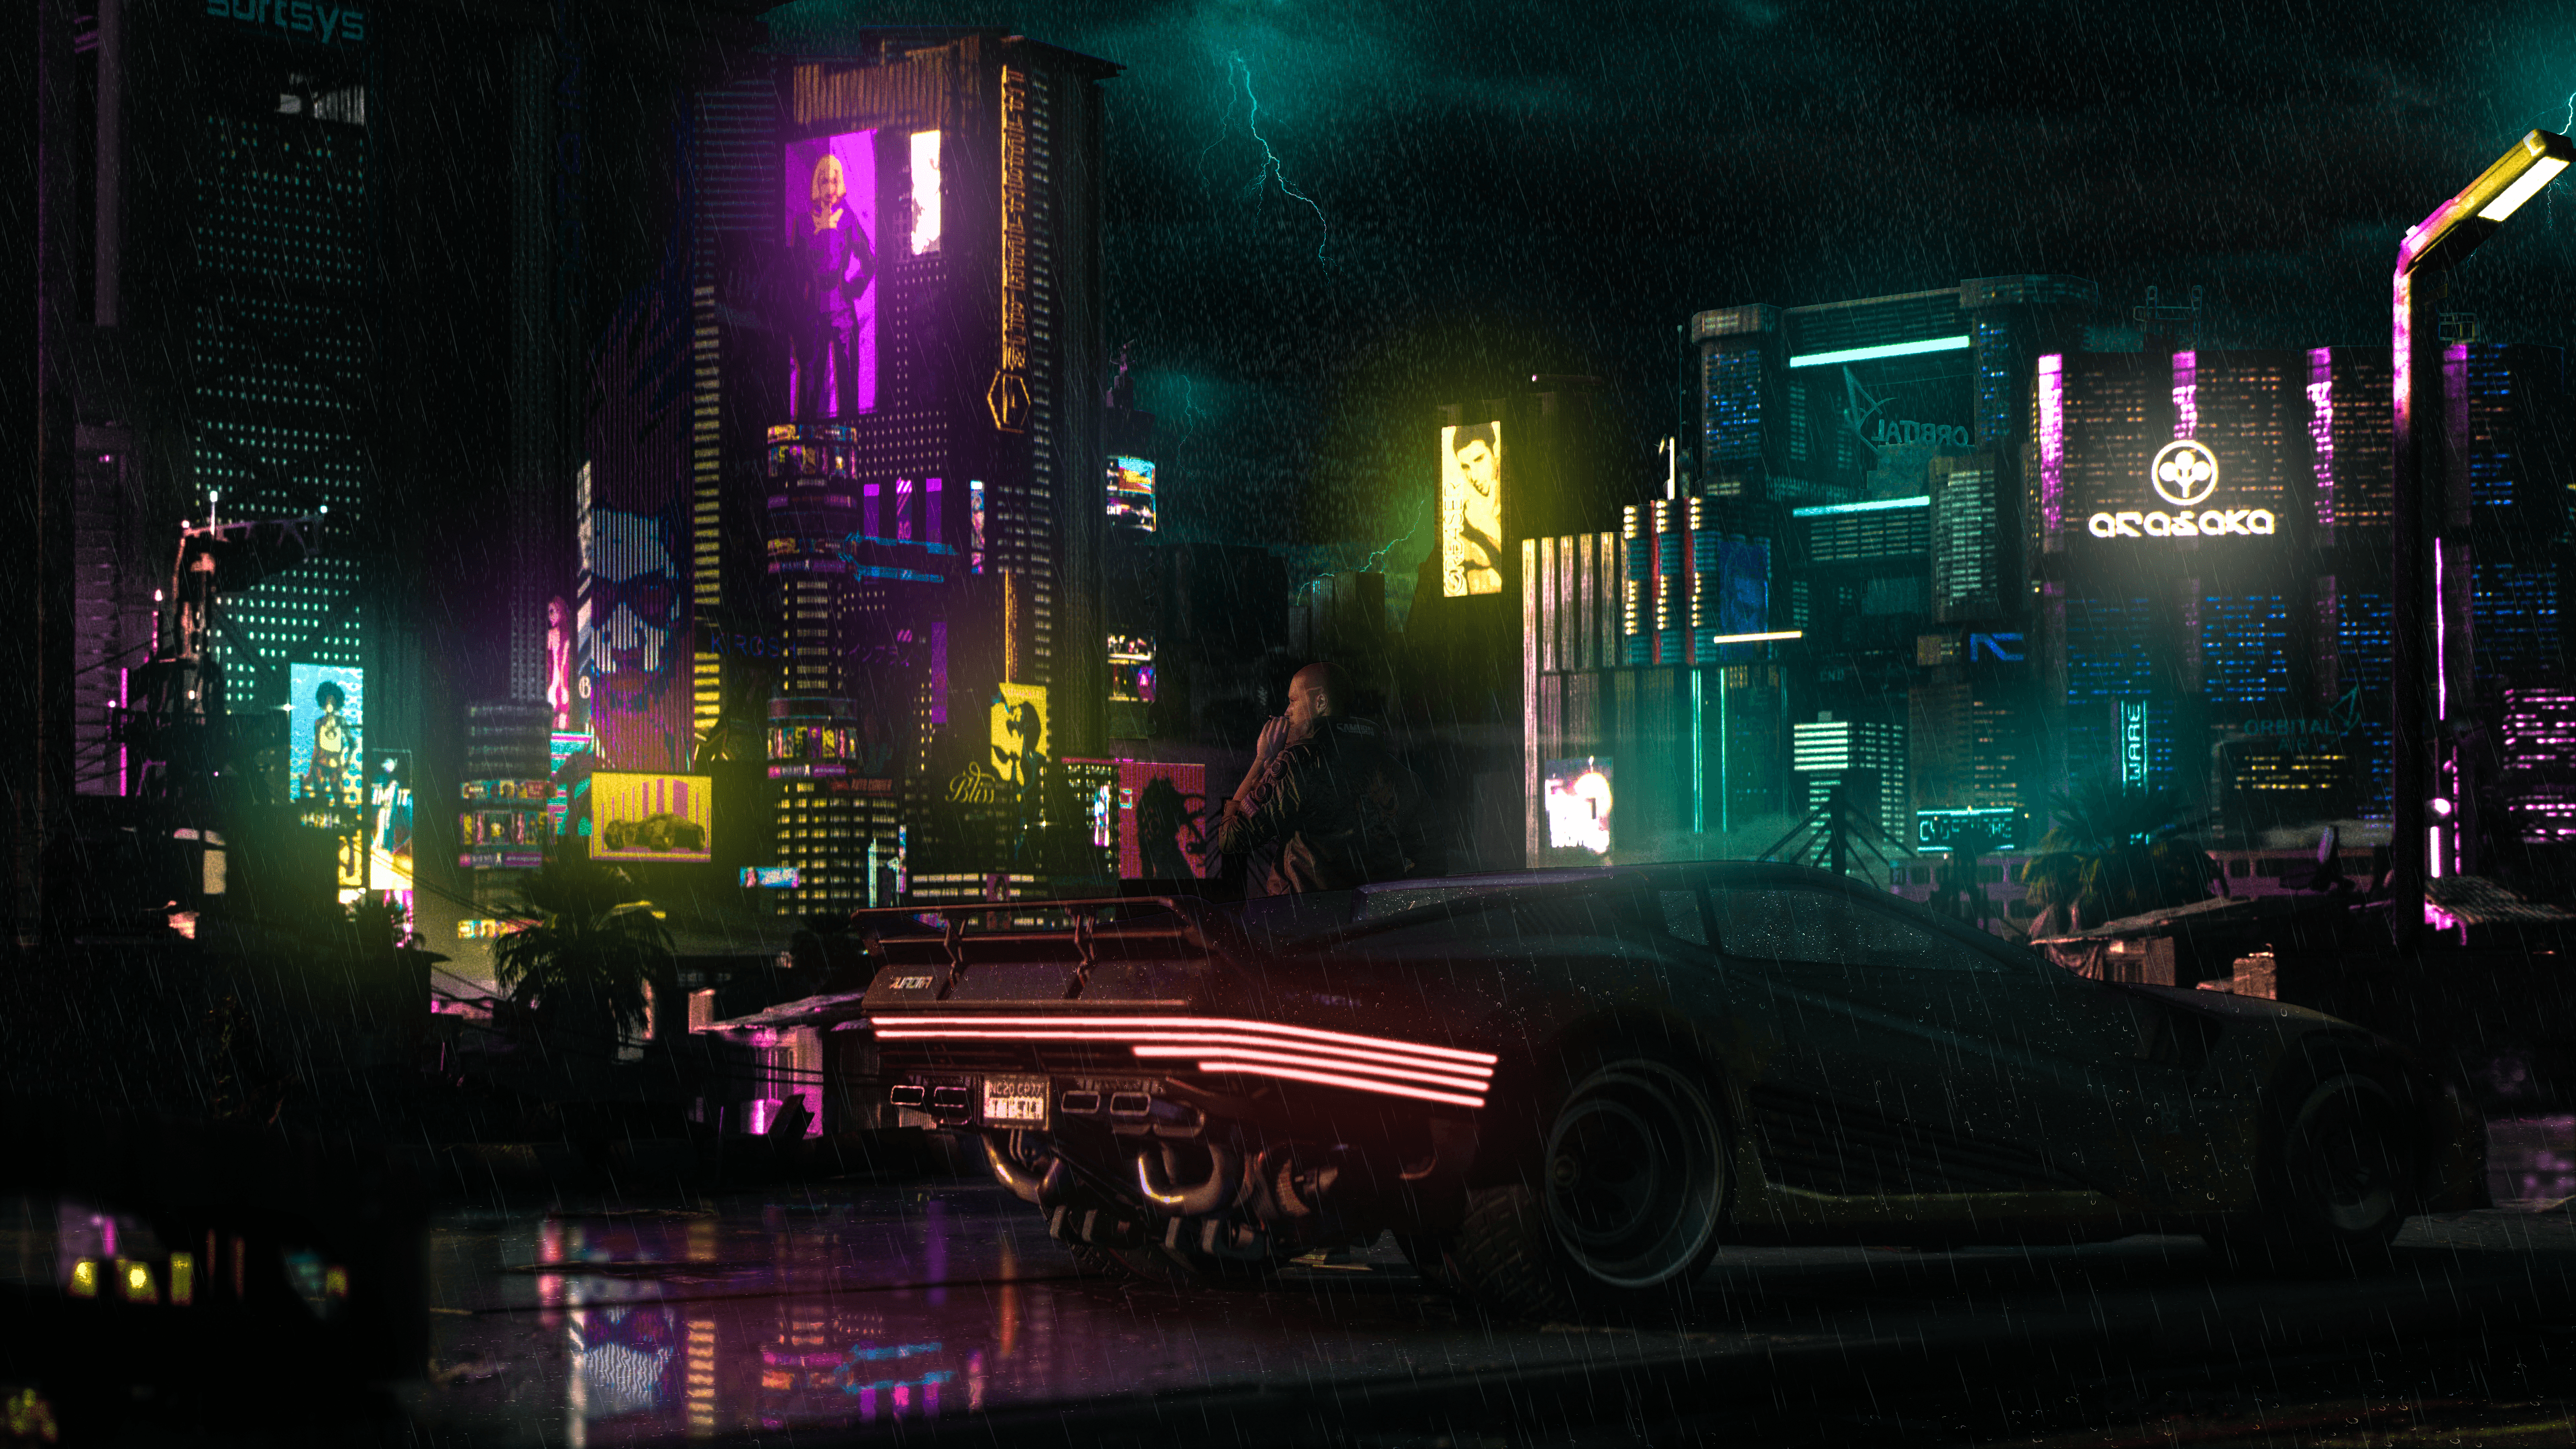 4K wallpaper I made of a rainy night in the city